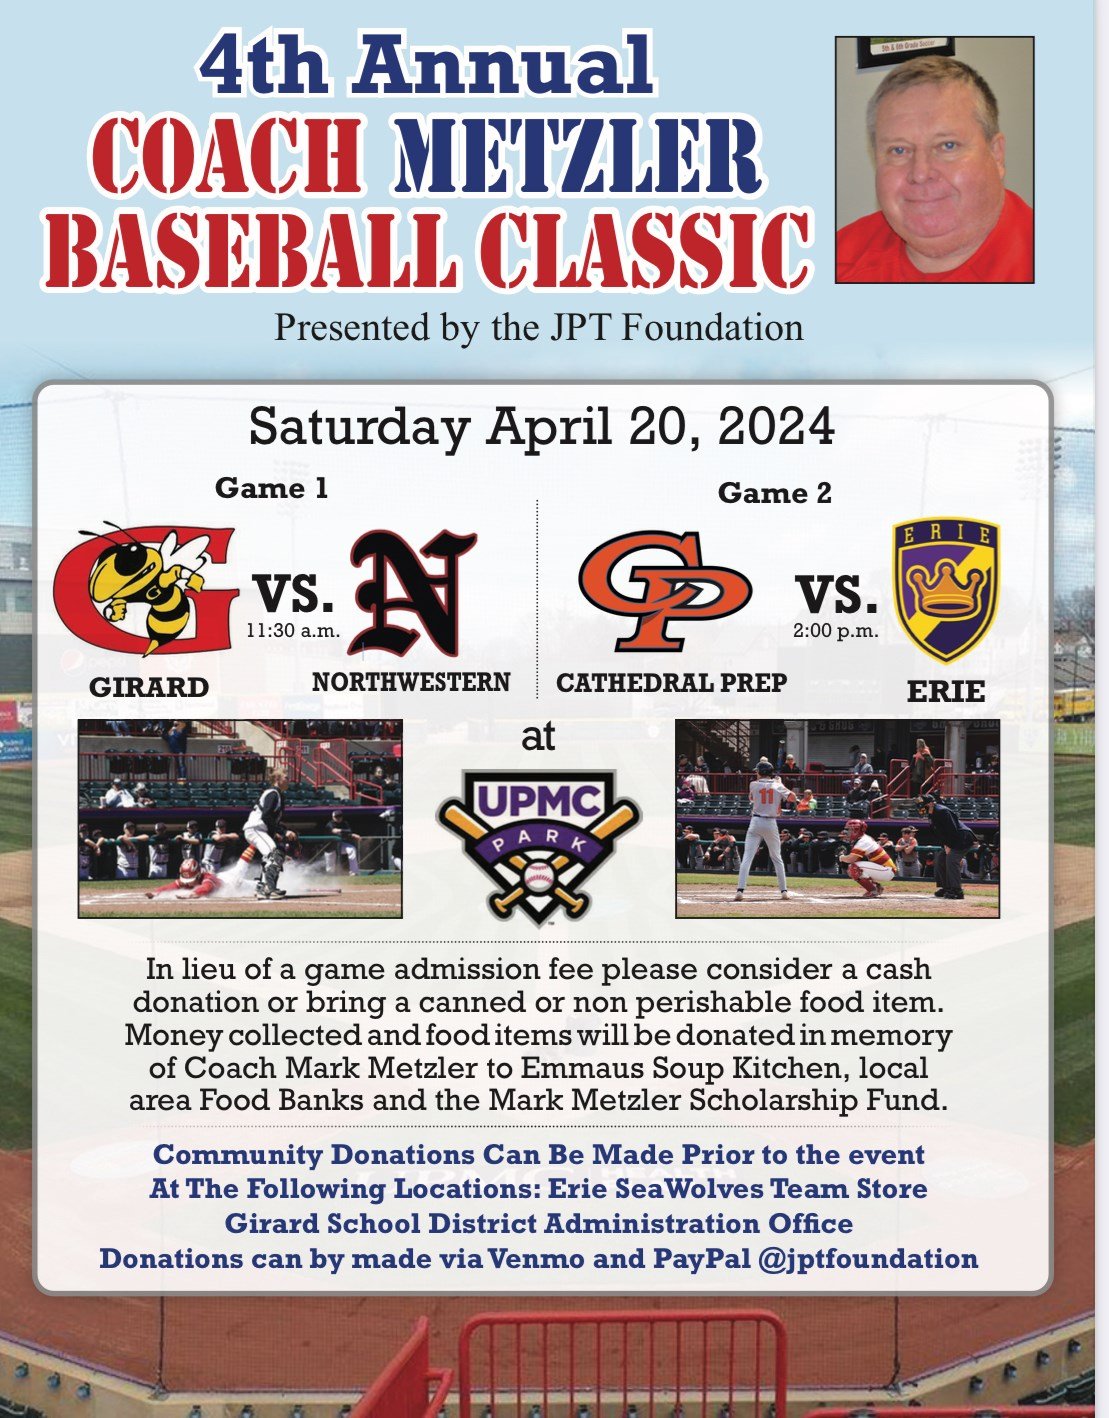 4th Annual Metzler Baseball Classic is Set for Saturday